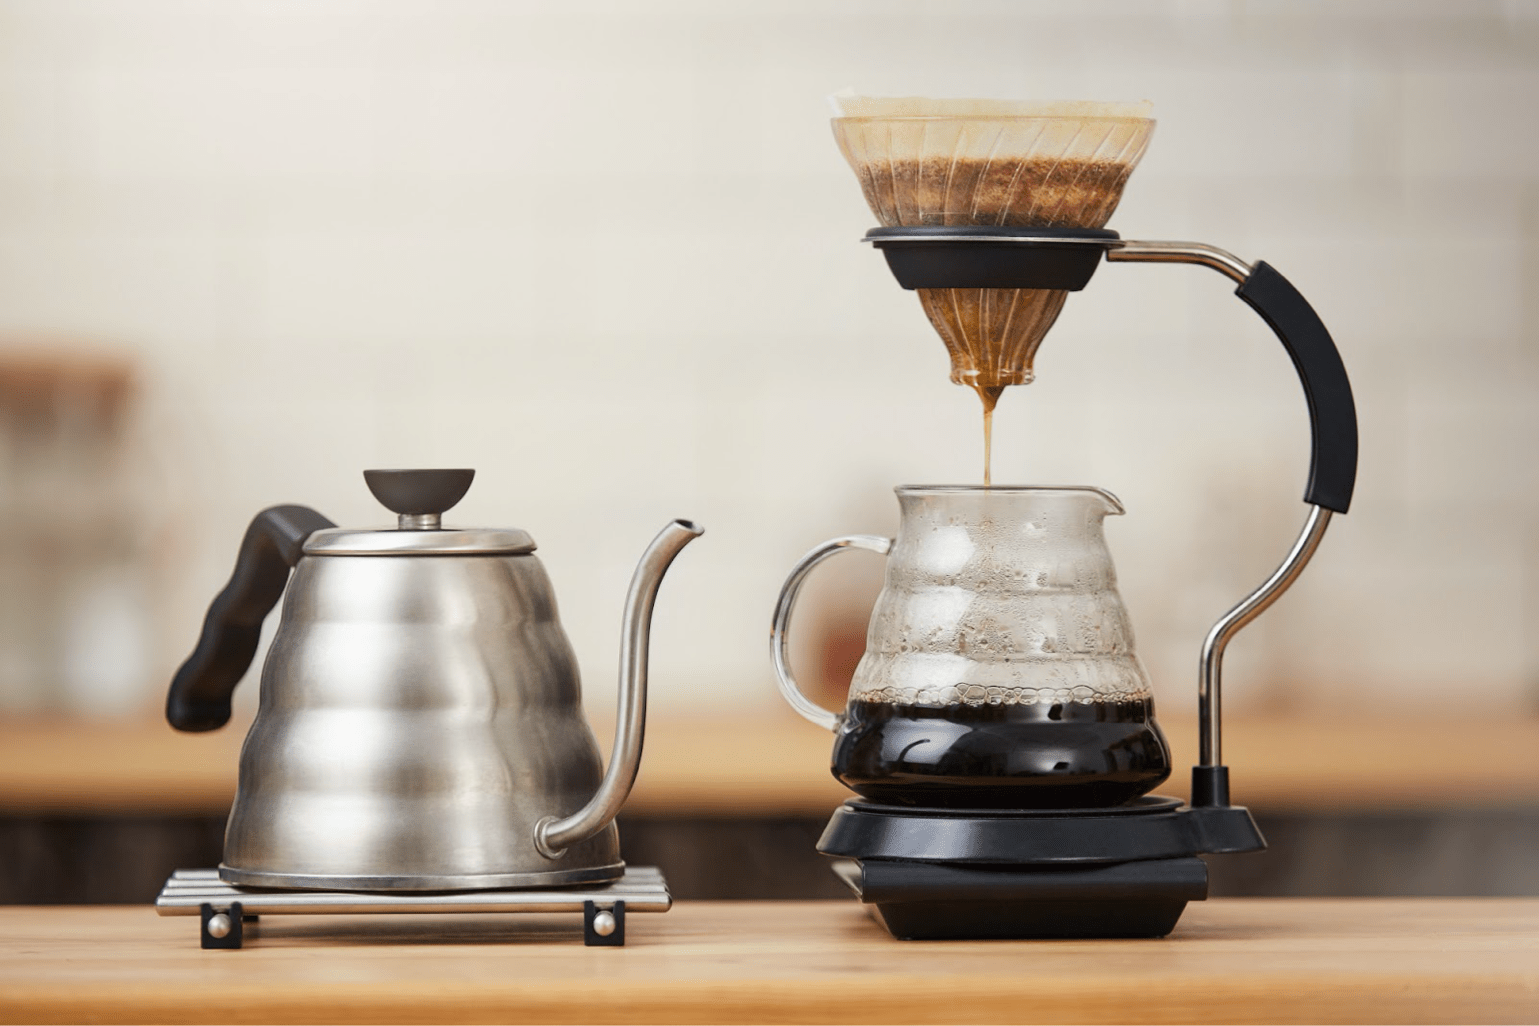 Brewing Methods Compared: How Should You Make Coffee at Home? | Perfect Daily Grind